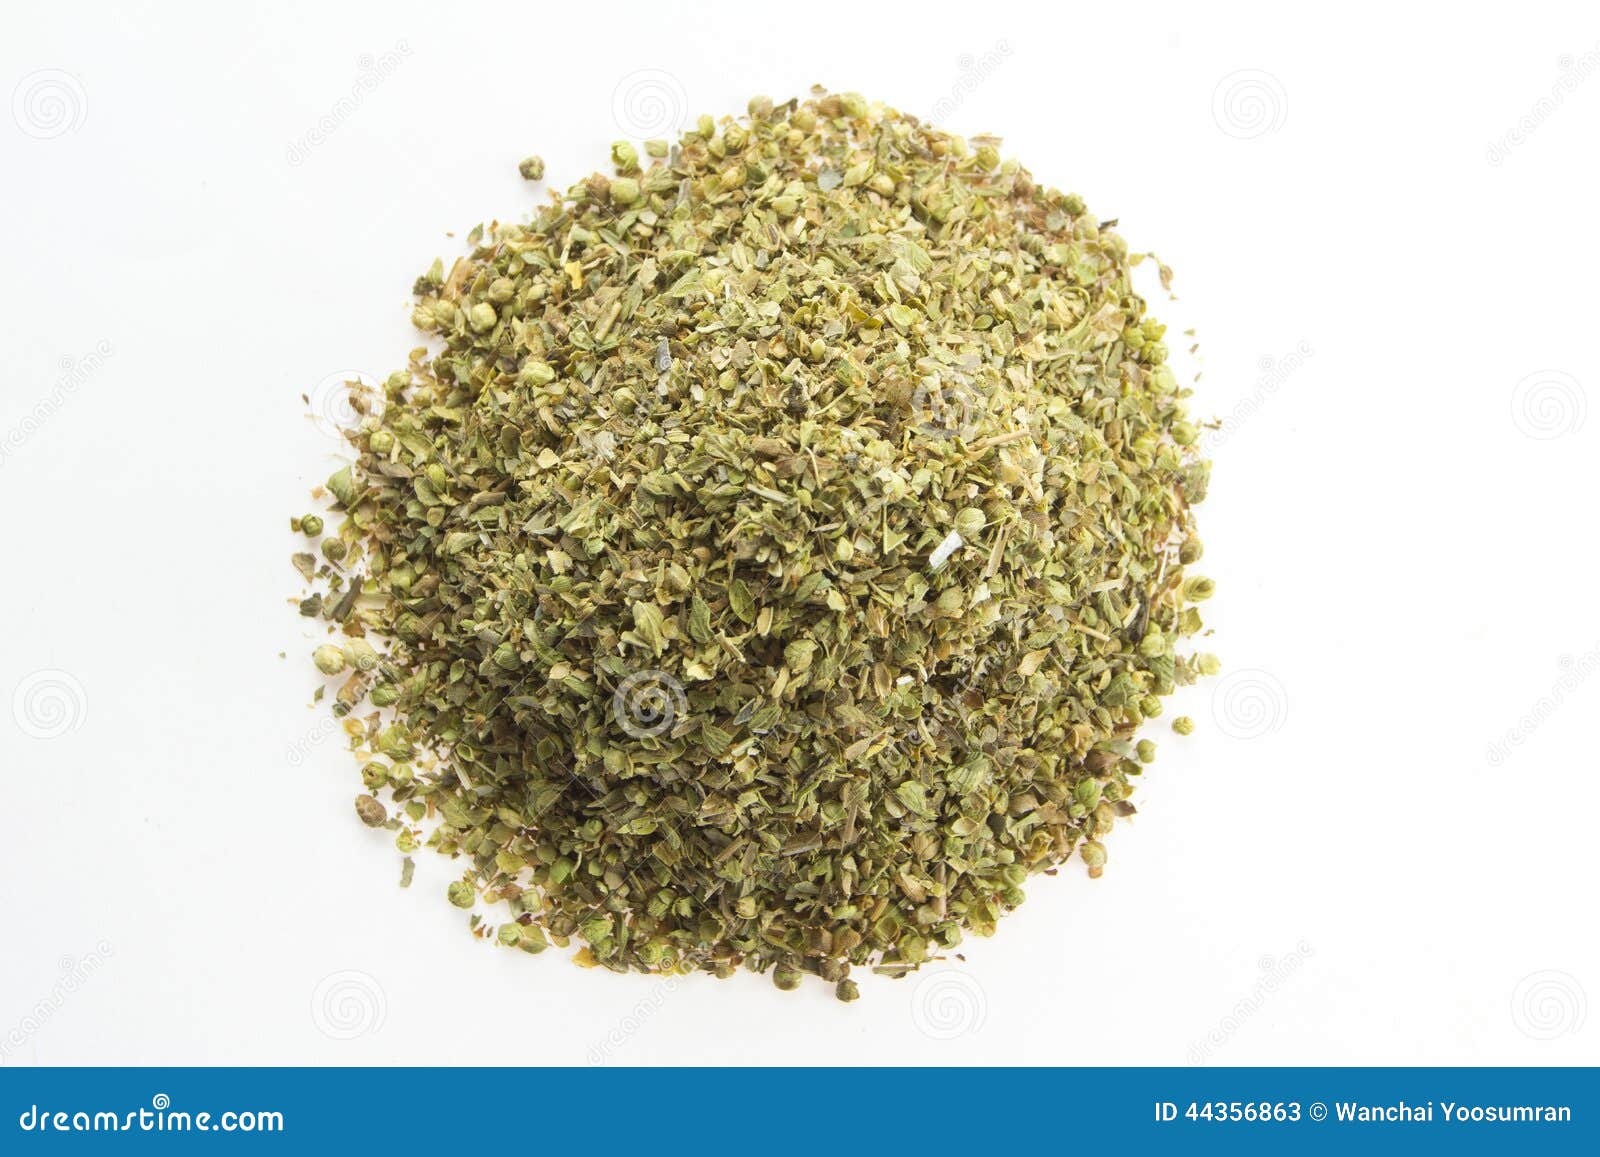 Dried Oregano Leaves On A White Background Stock Image ...